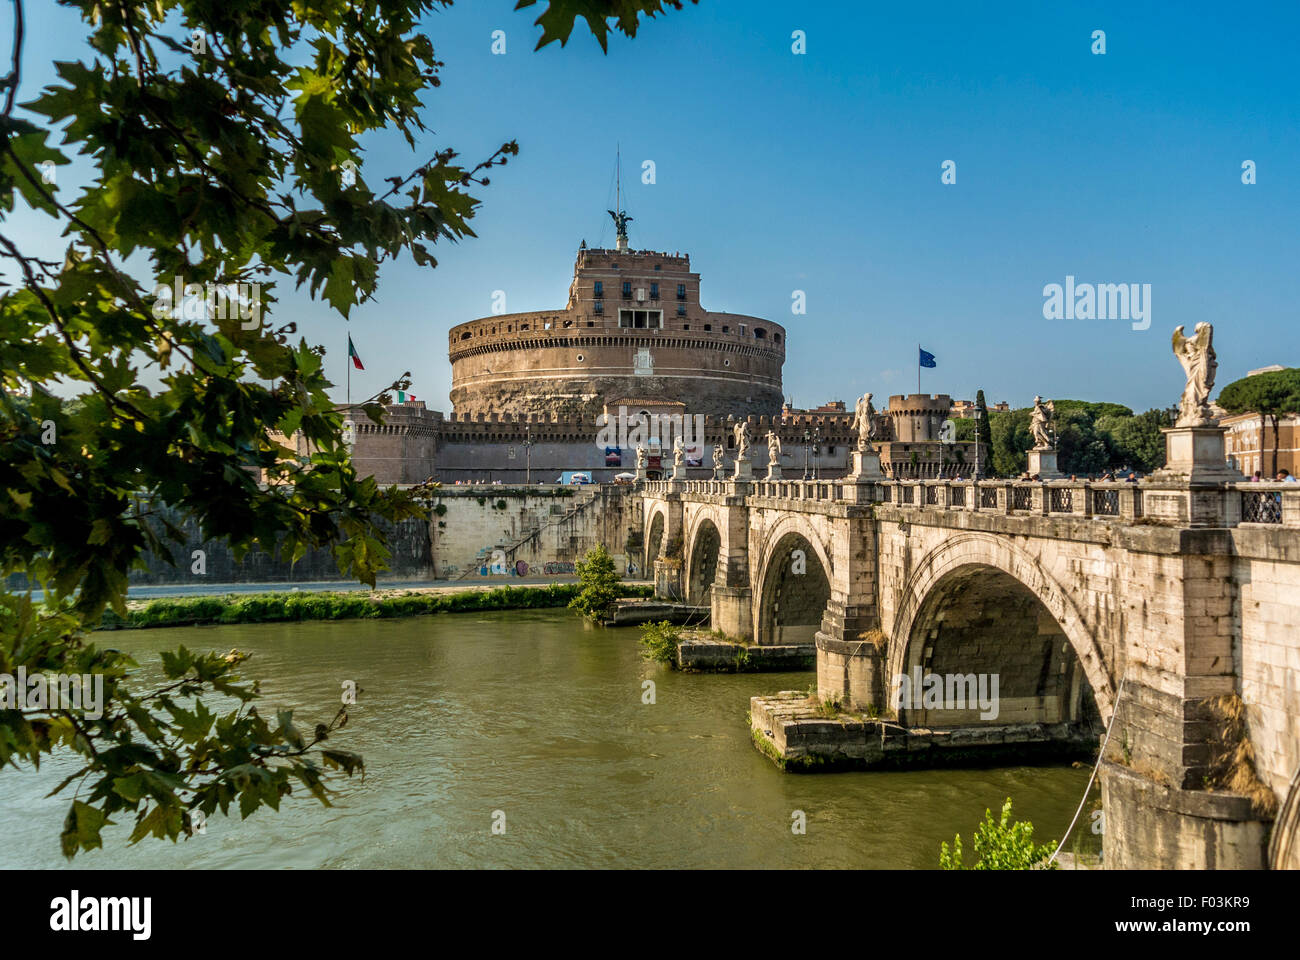 Castel sant'Angelo on the banks of the river tiber. Accessed by the ponte sant'angelo, Rome, Italy. Stock Photo